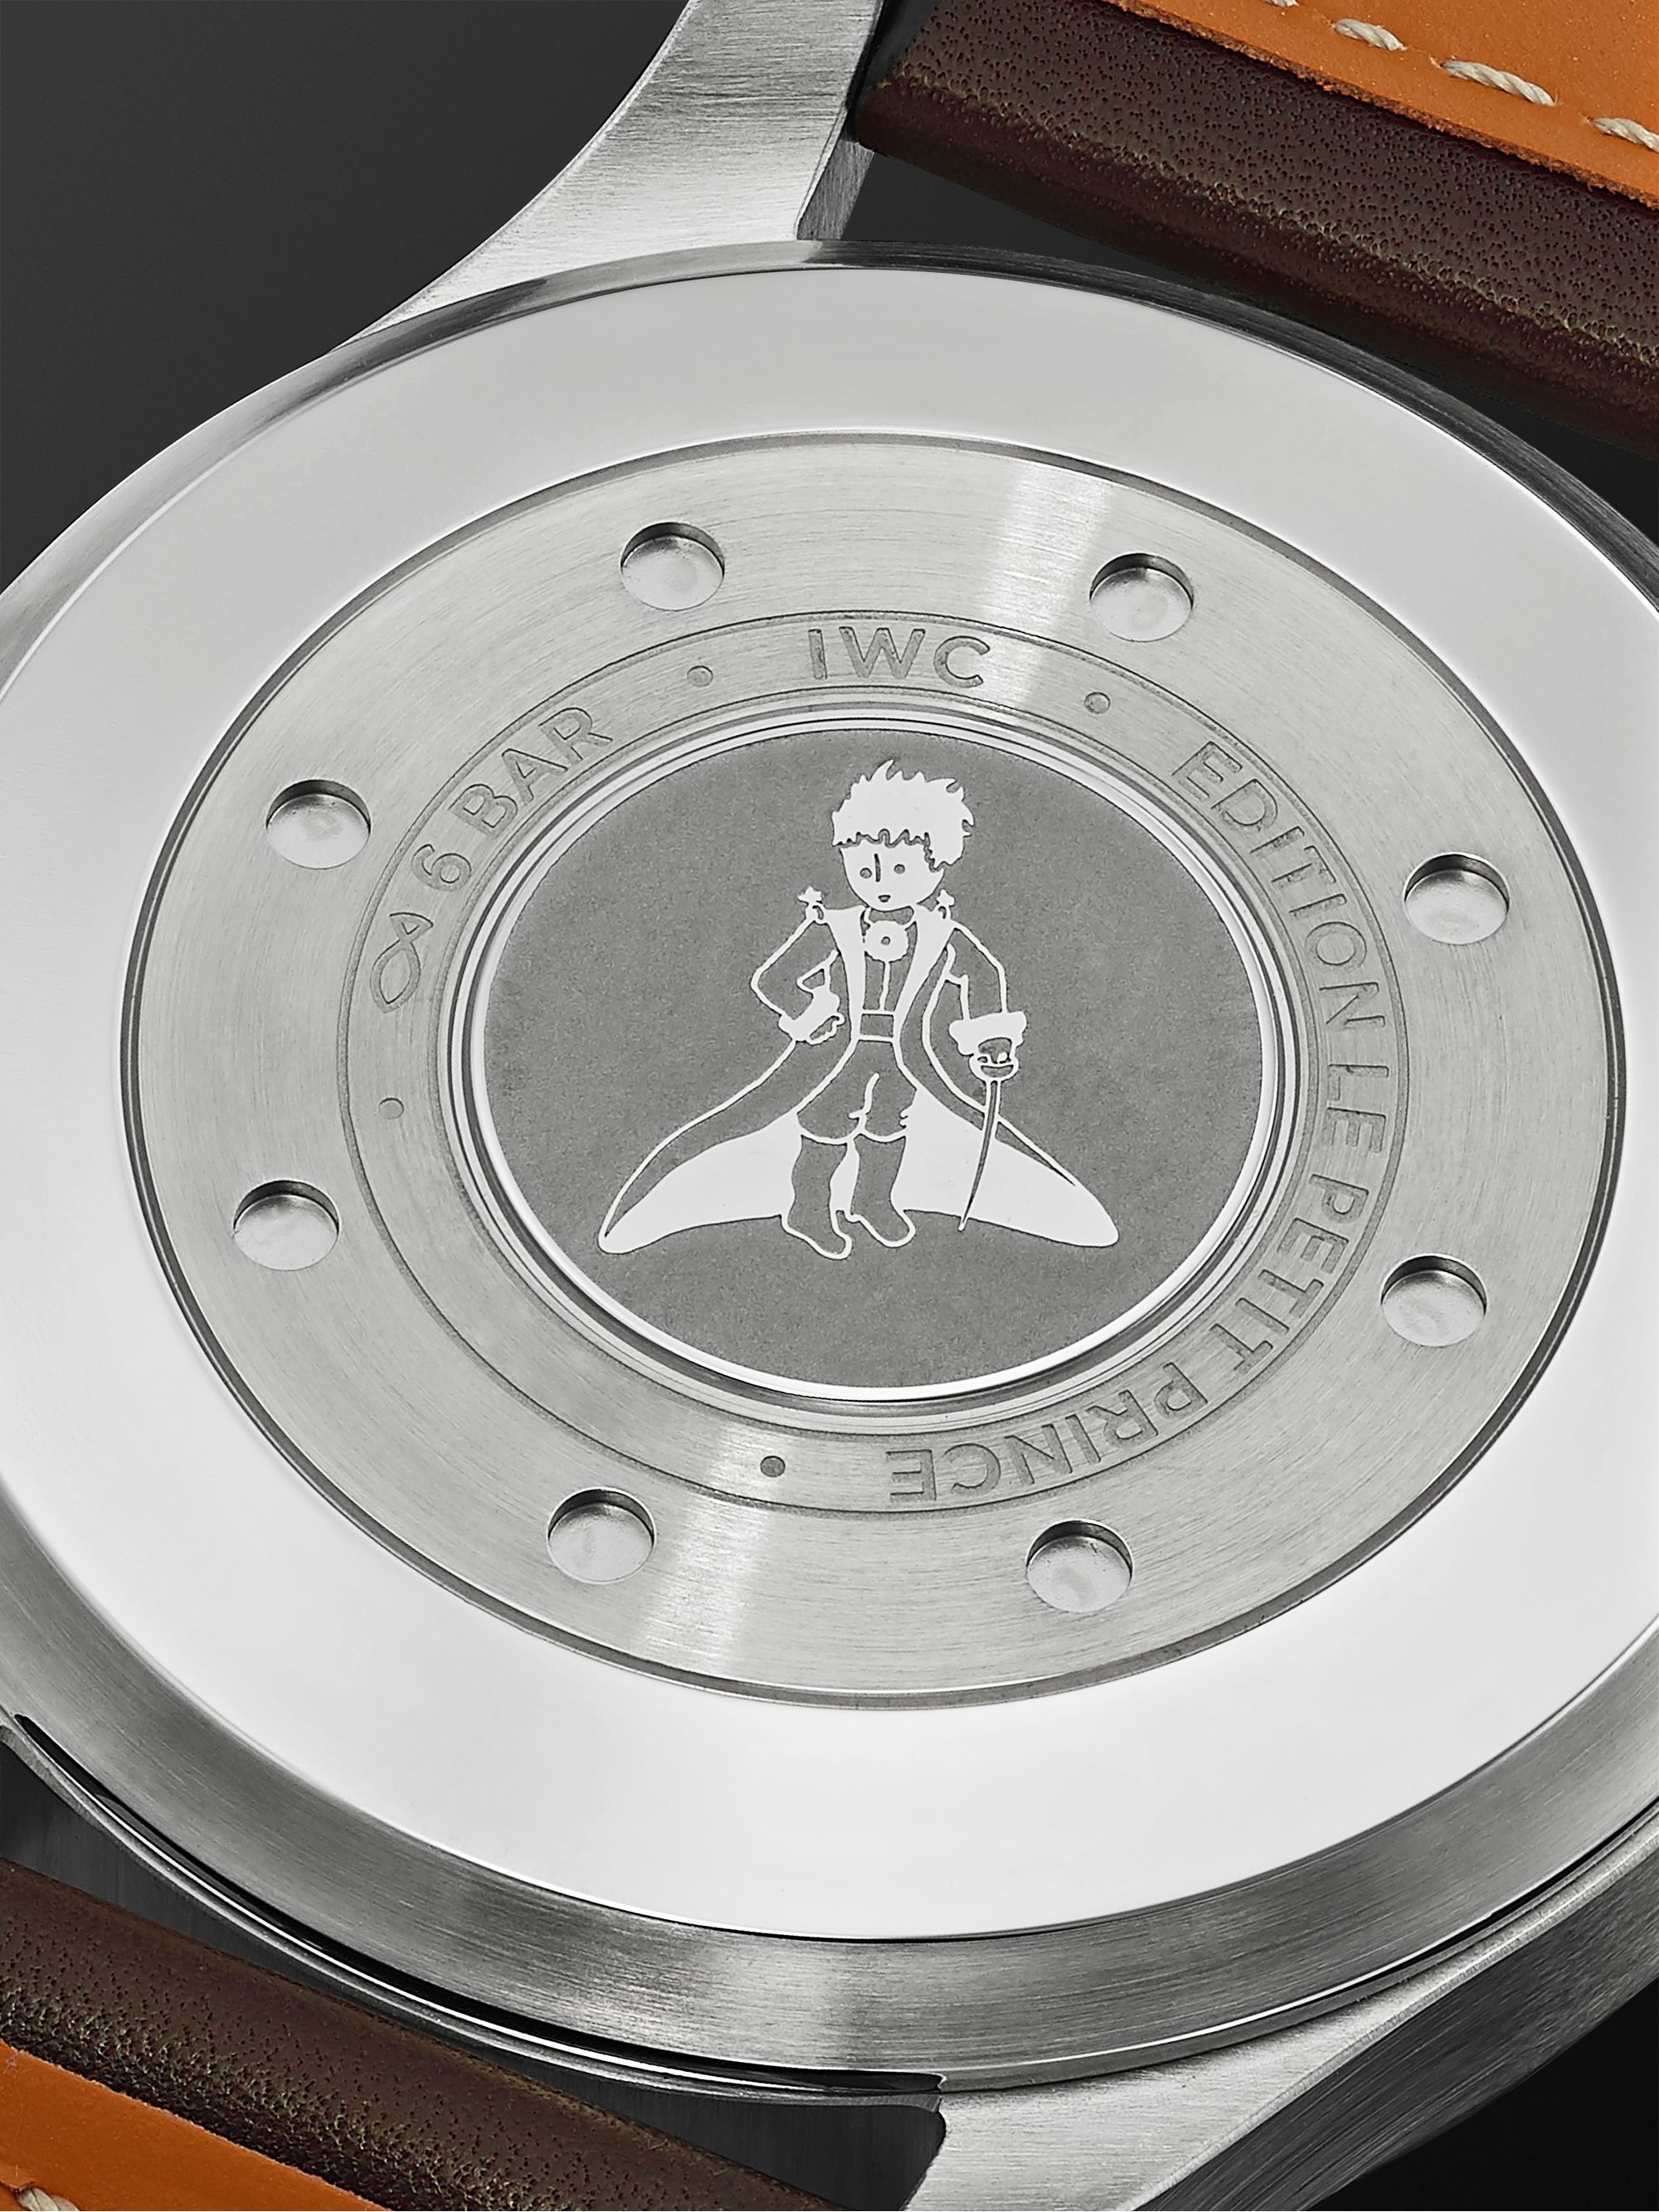 IWC SCHAFFHAUSEN Big Pilot's Le Petit Prince Automatic 46mm Stainless Steel and Leather Watch, Ref. No. IW501002